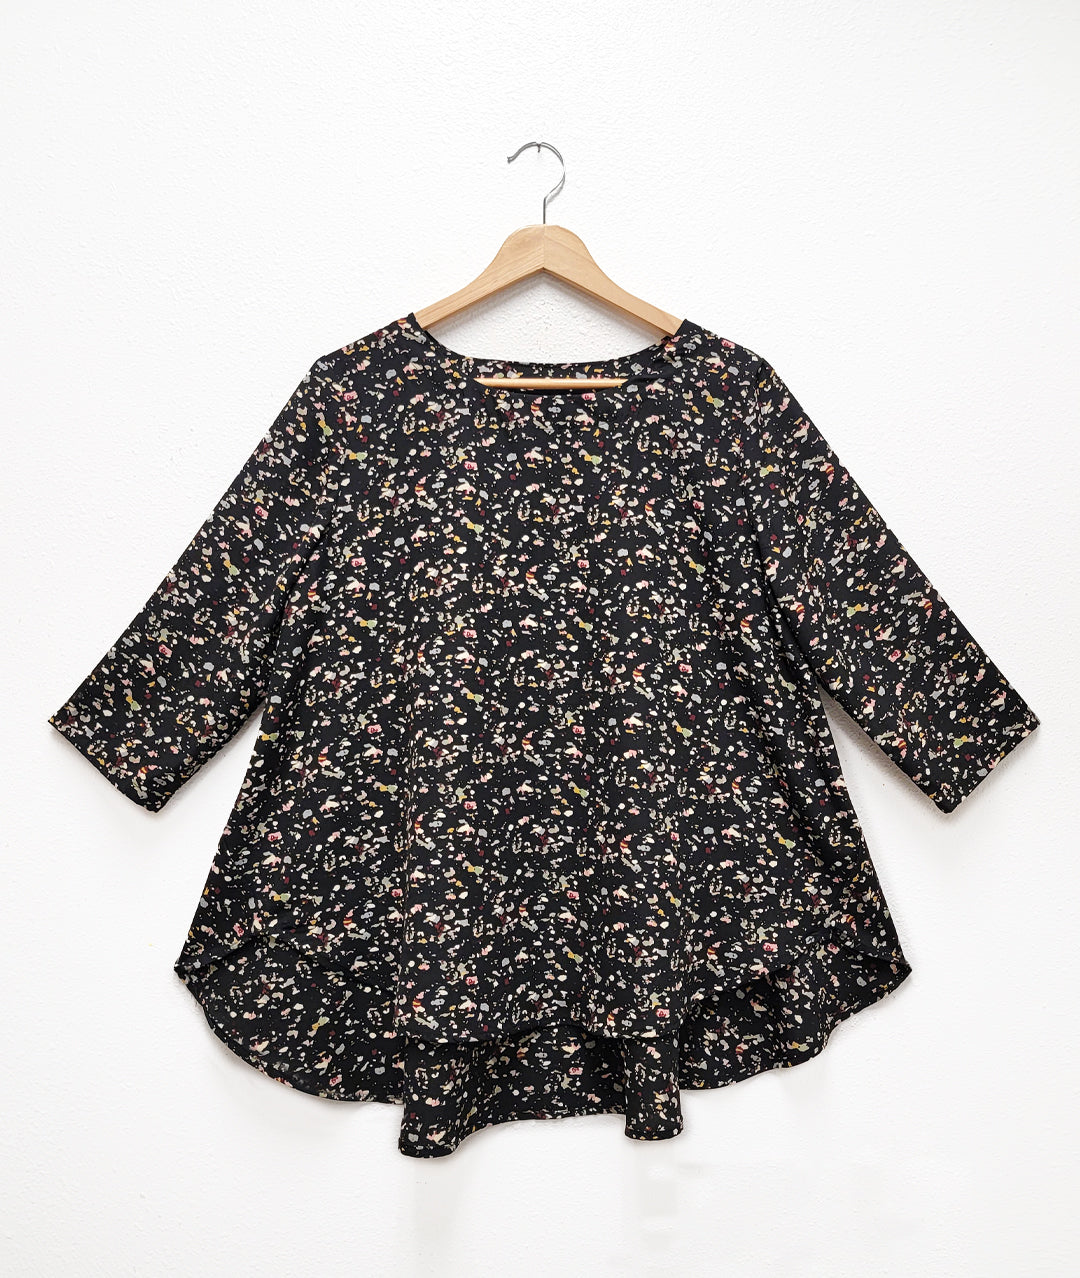 black terrazzo print pull over top with 3/4 sleeves, a round neckline and a flowy high-low body